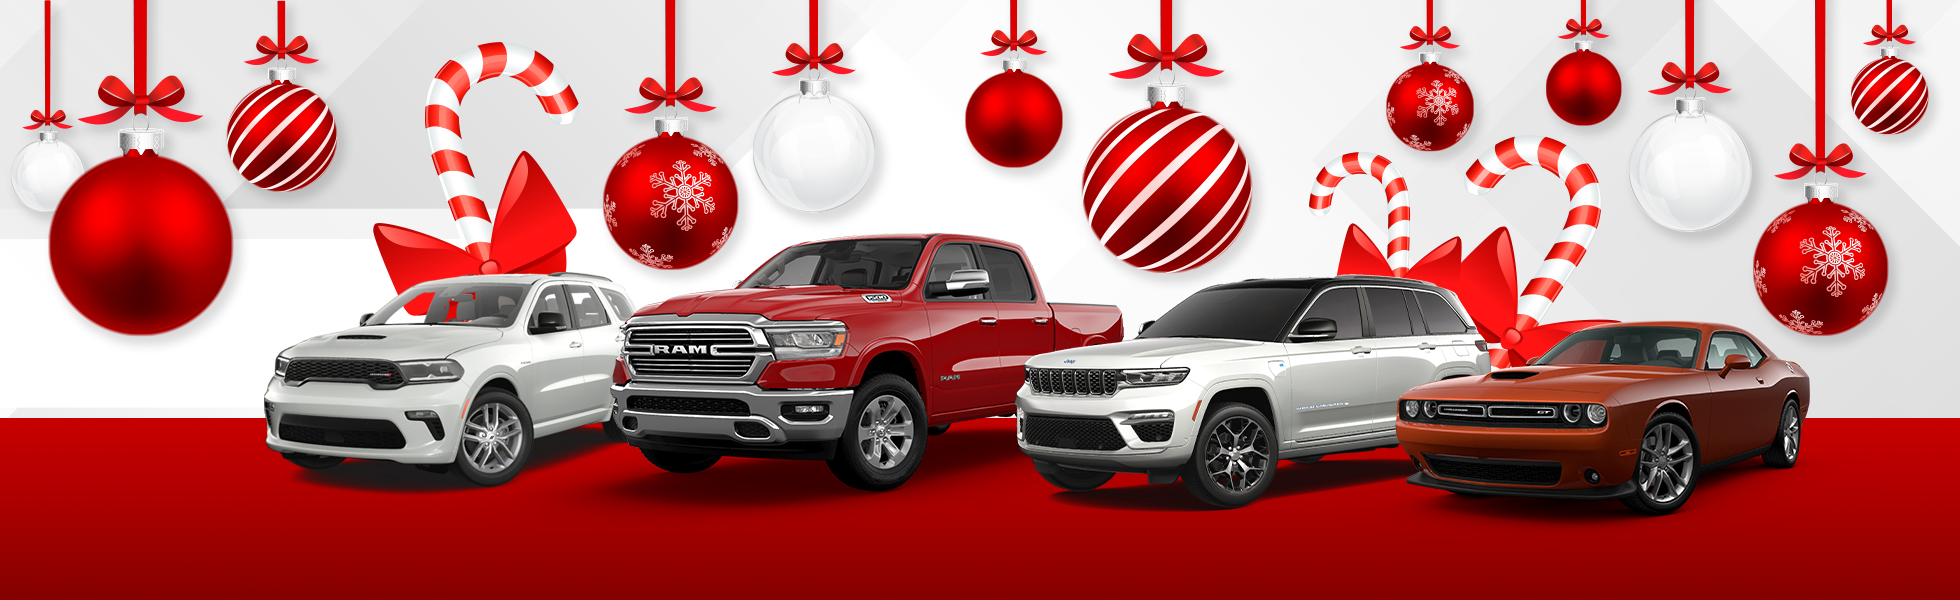 Holiday Sales Event banner featuring Chrysler, Dodge, Jeep and Ram models on display on a decorative winter holiday background